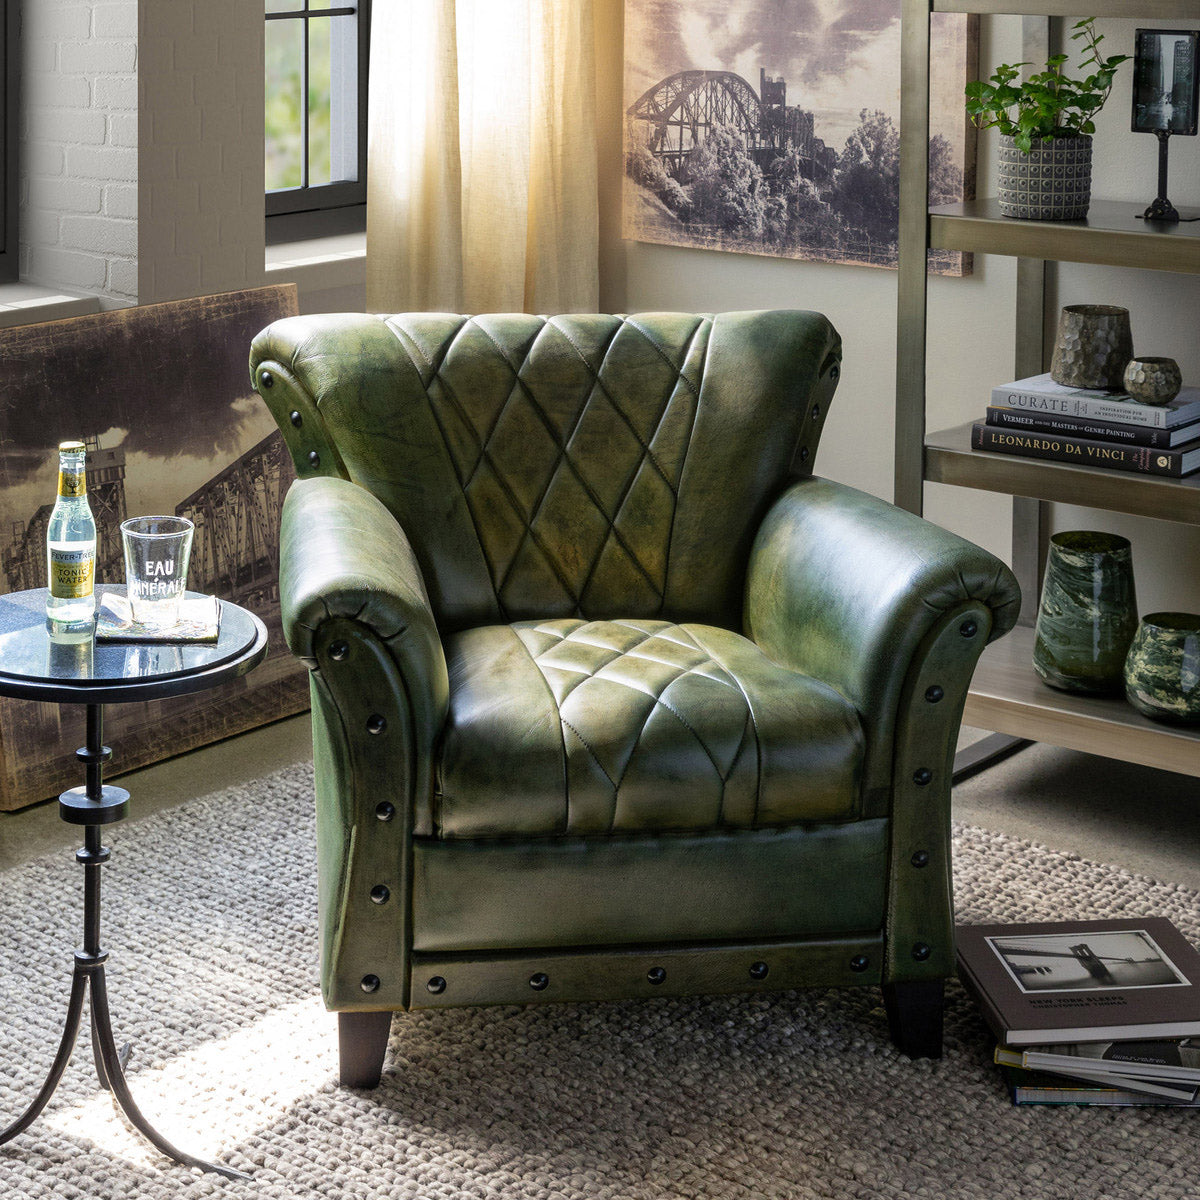 Conrad Forest Green Leather Armchair- More Coming Soon!